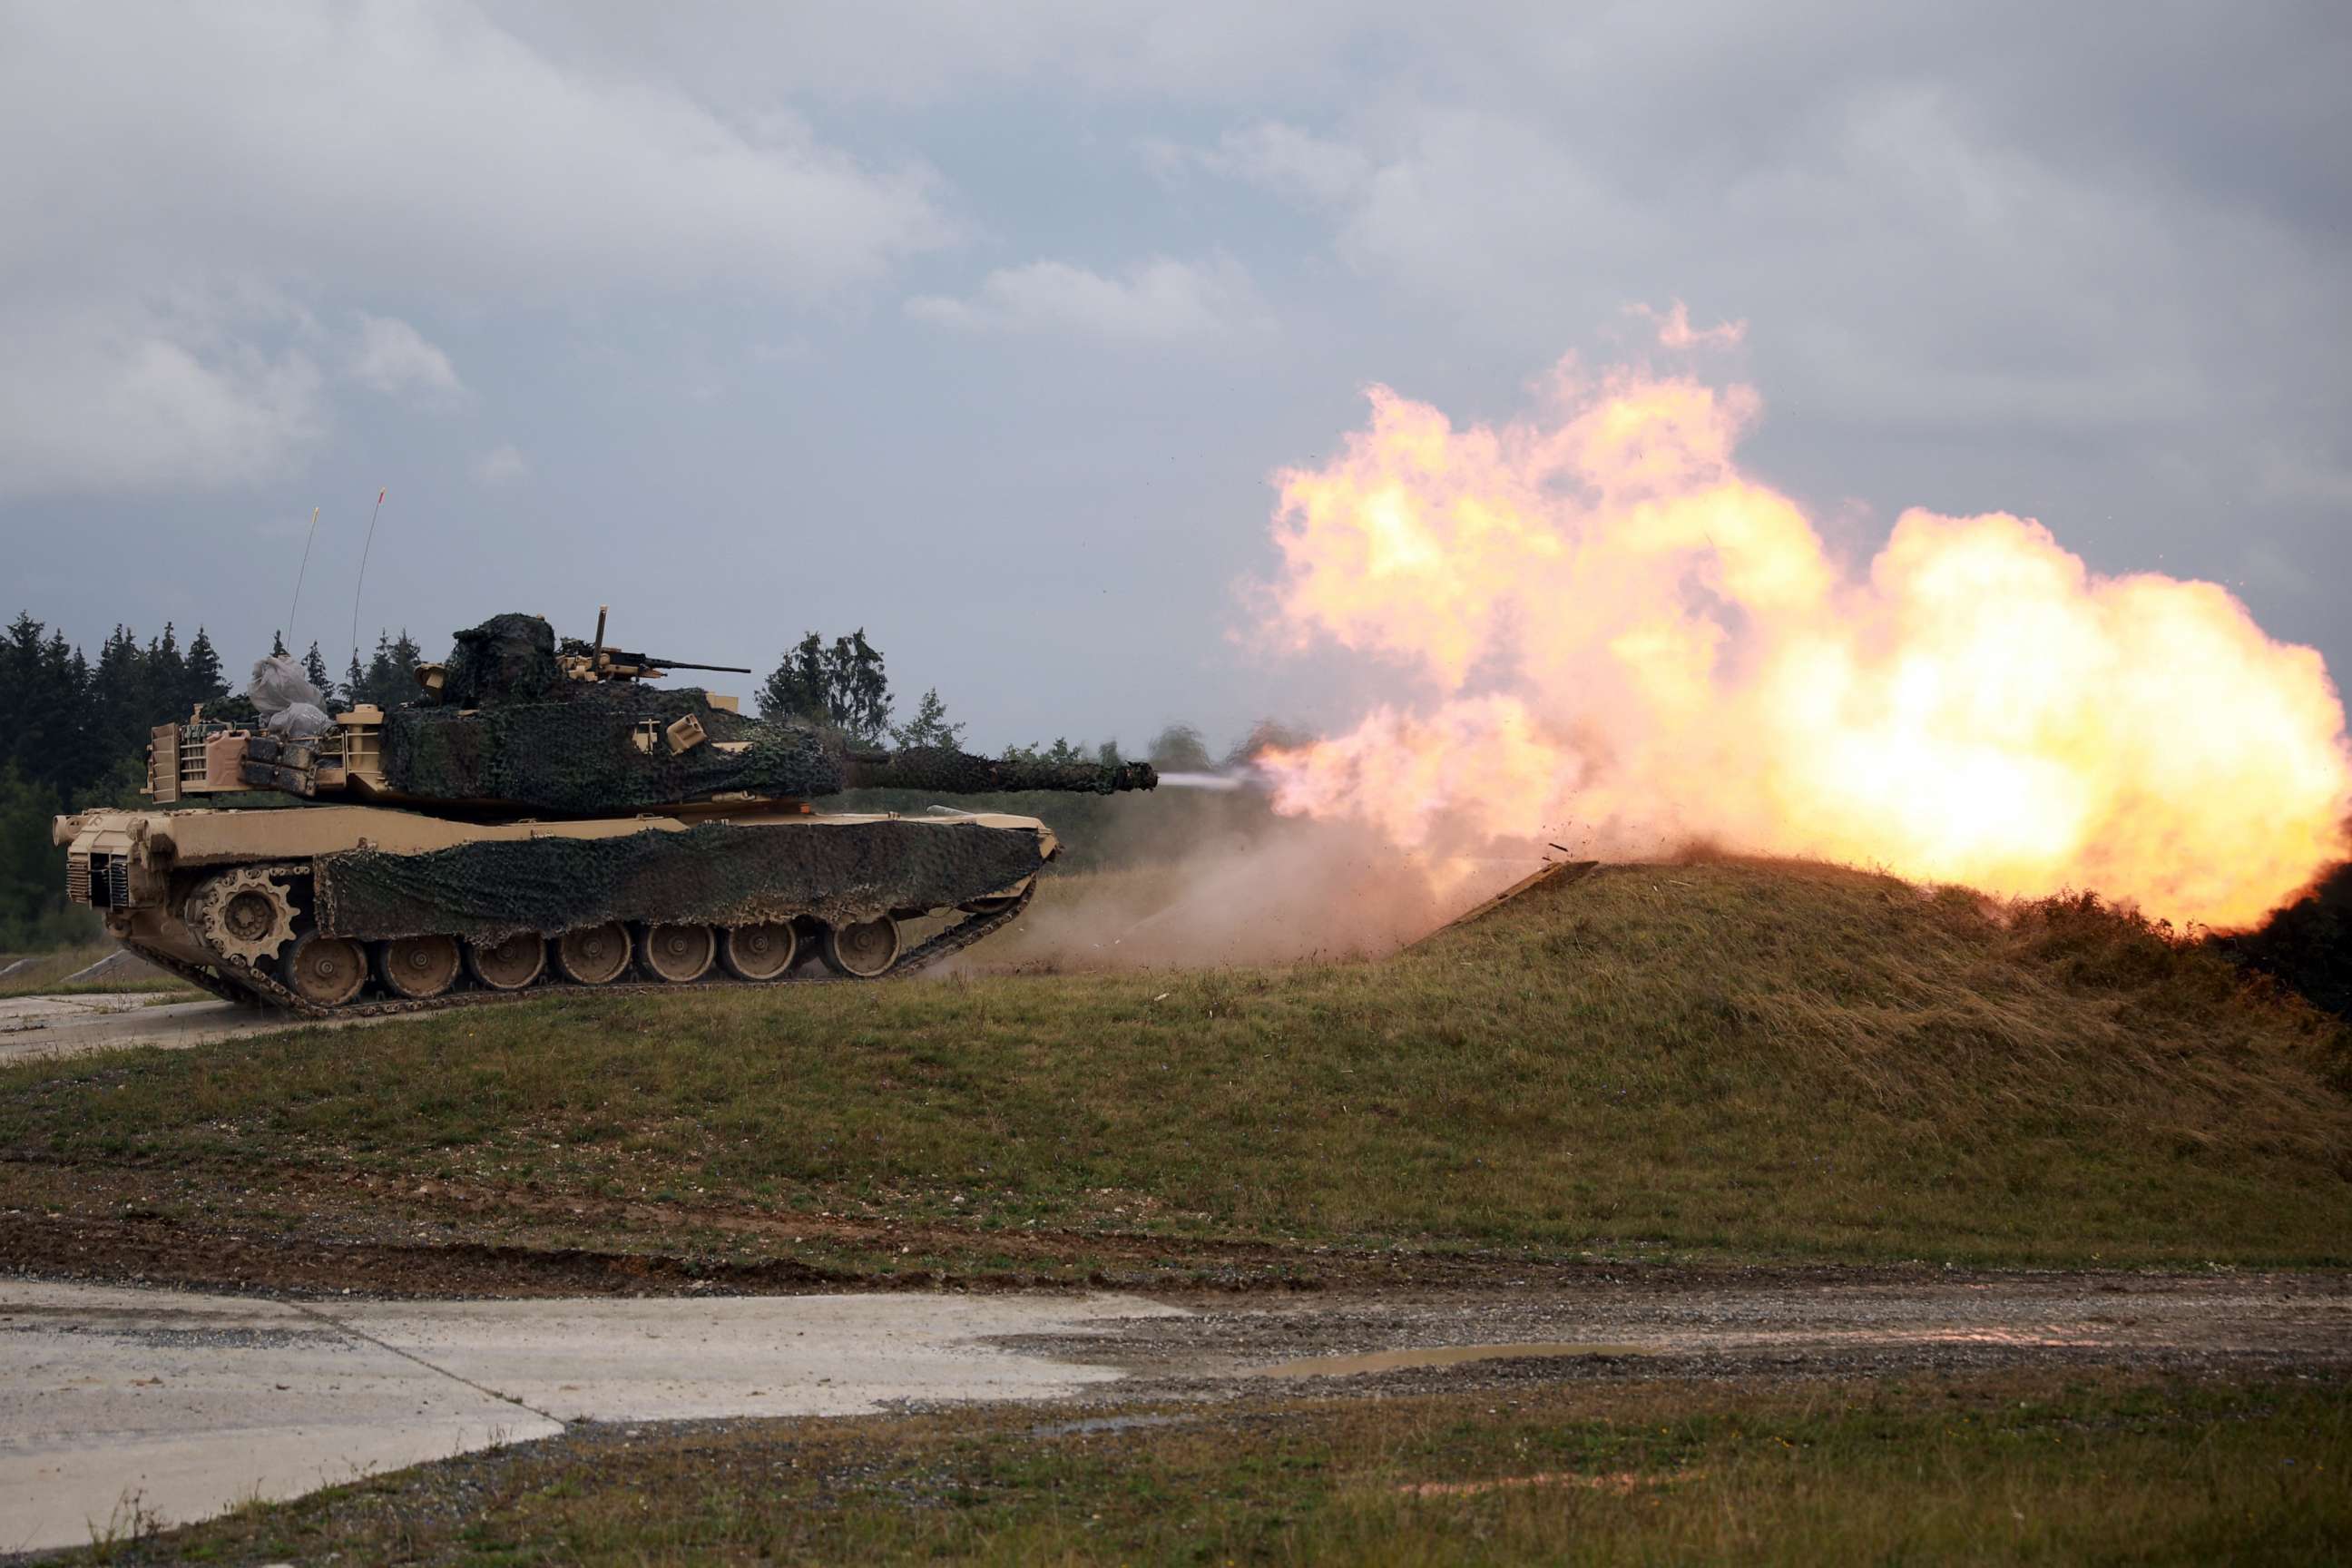 PHOTO: An M1A1 Abrams main battle tank assigned to 3rd Battalion fires its main gun during the Combined Arms Live Fire Training Exercise at Grafenwoehr Training Area, Germany, Sep. 1, 2020.